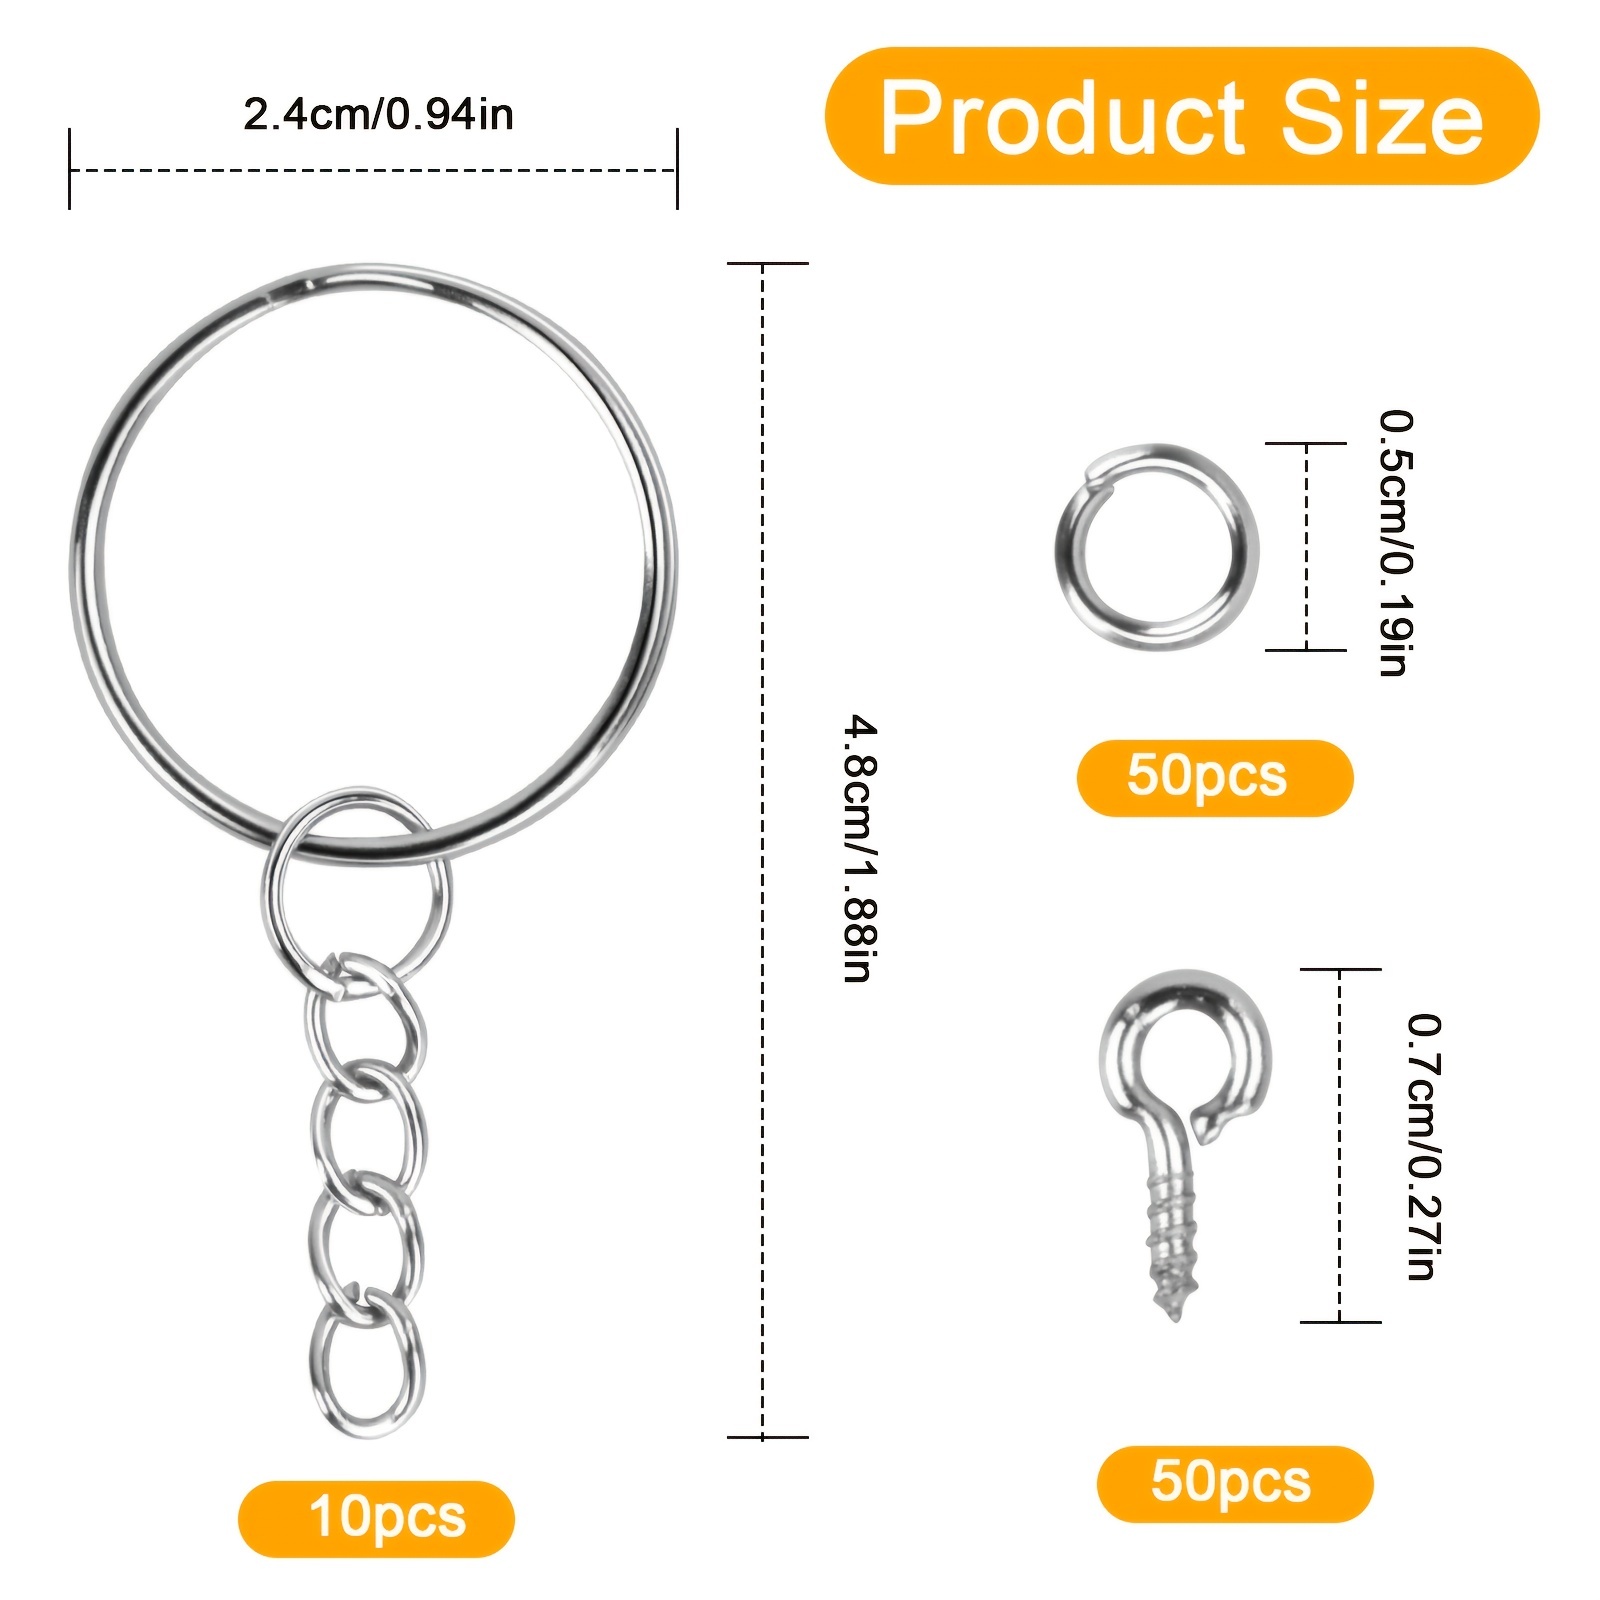 ZTOO 100Pcs Chain Keychain Rings 25mm Silver Key Chain Rings with Jump  Rings & Screw Eye Pins for Organizing Keys Jewelry Making 